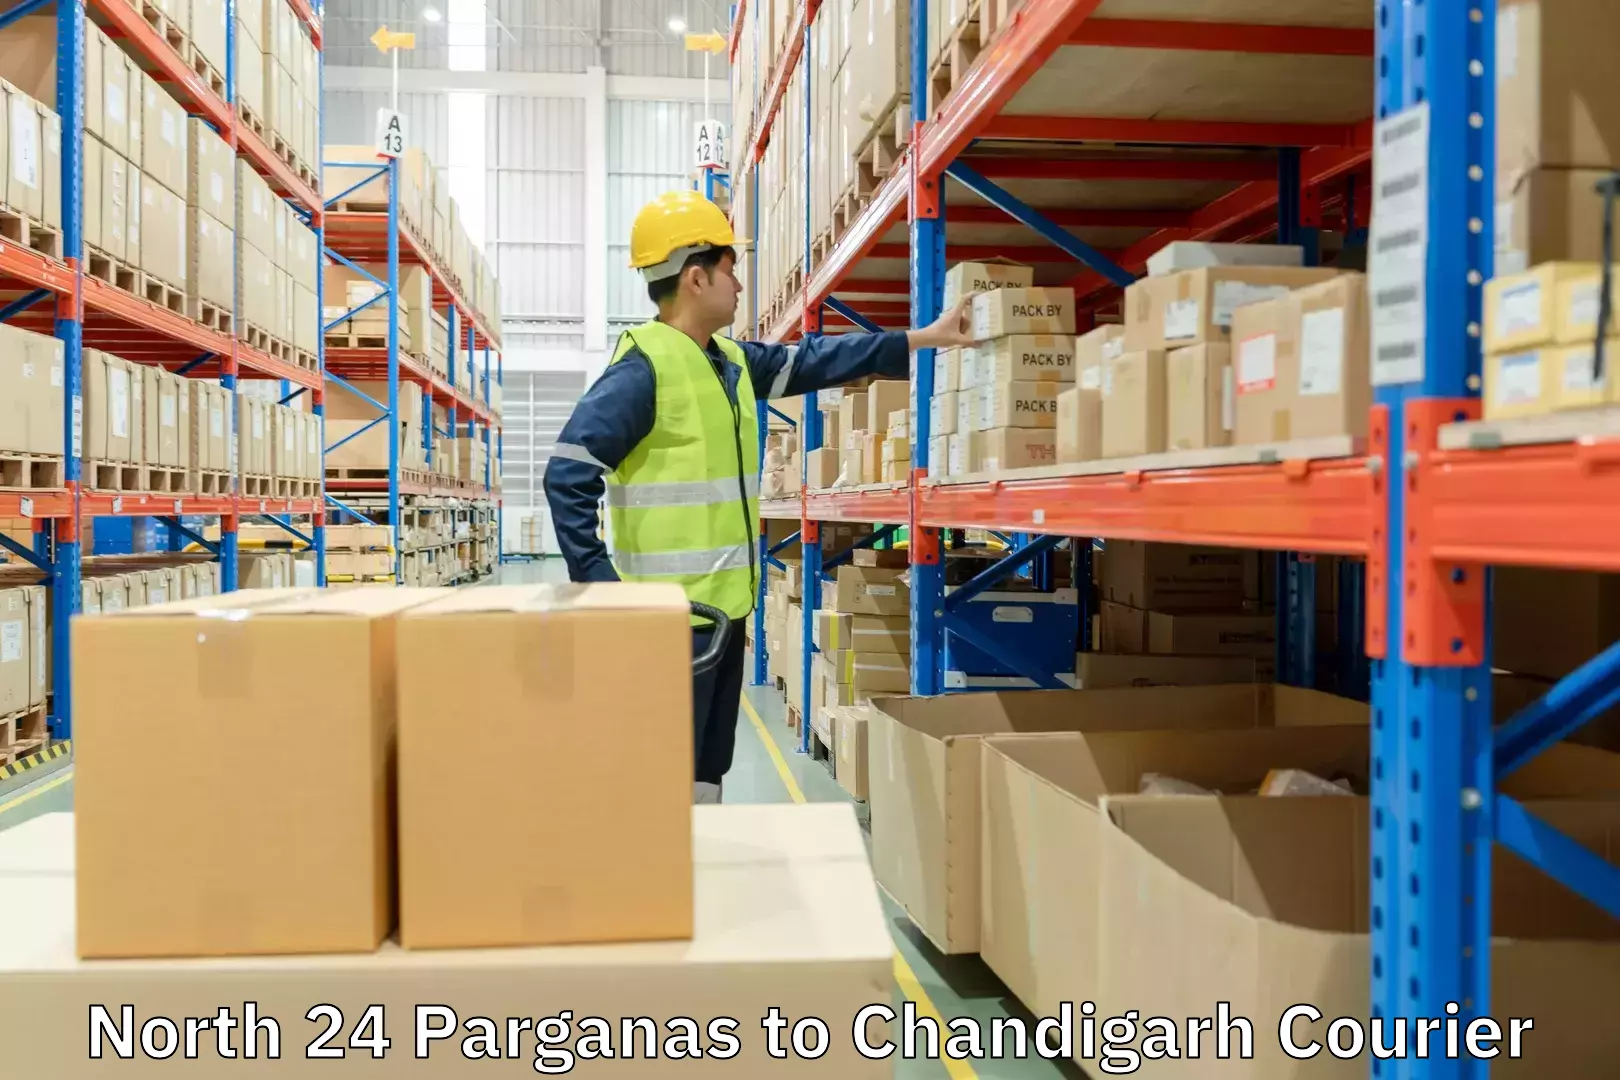 Advanced shipping technology North 24 Parganas to Chandigarh